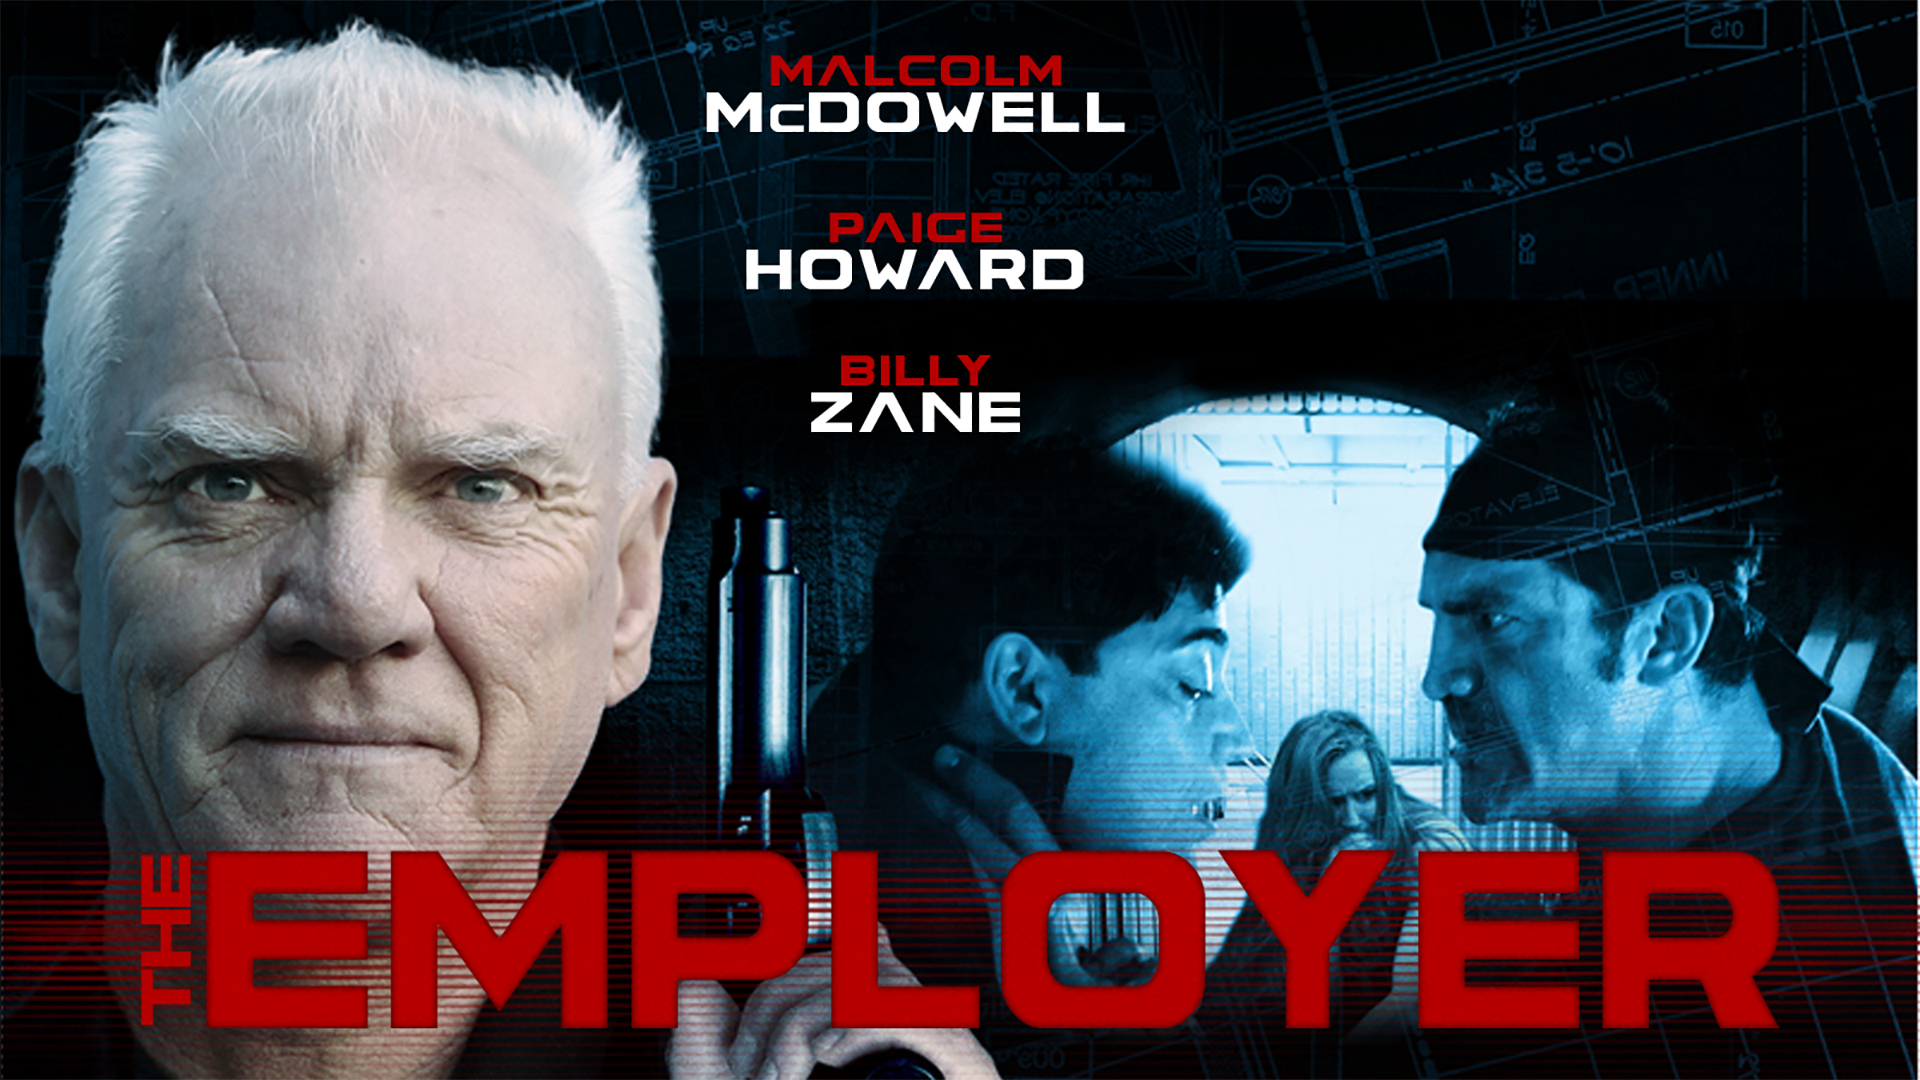 The Employer / The Employer (2013)